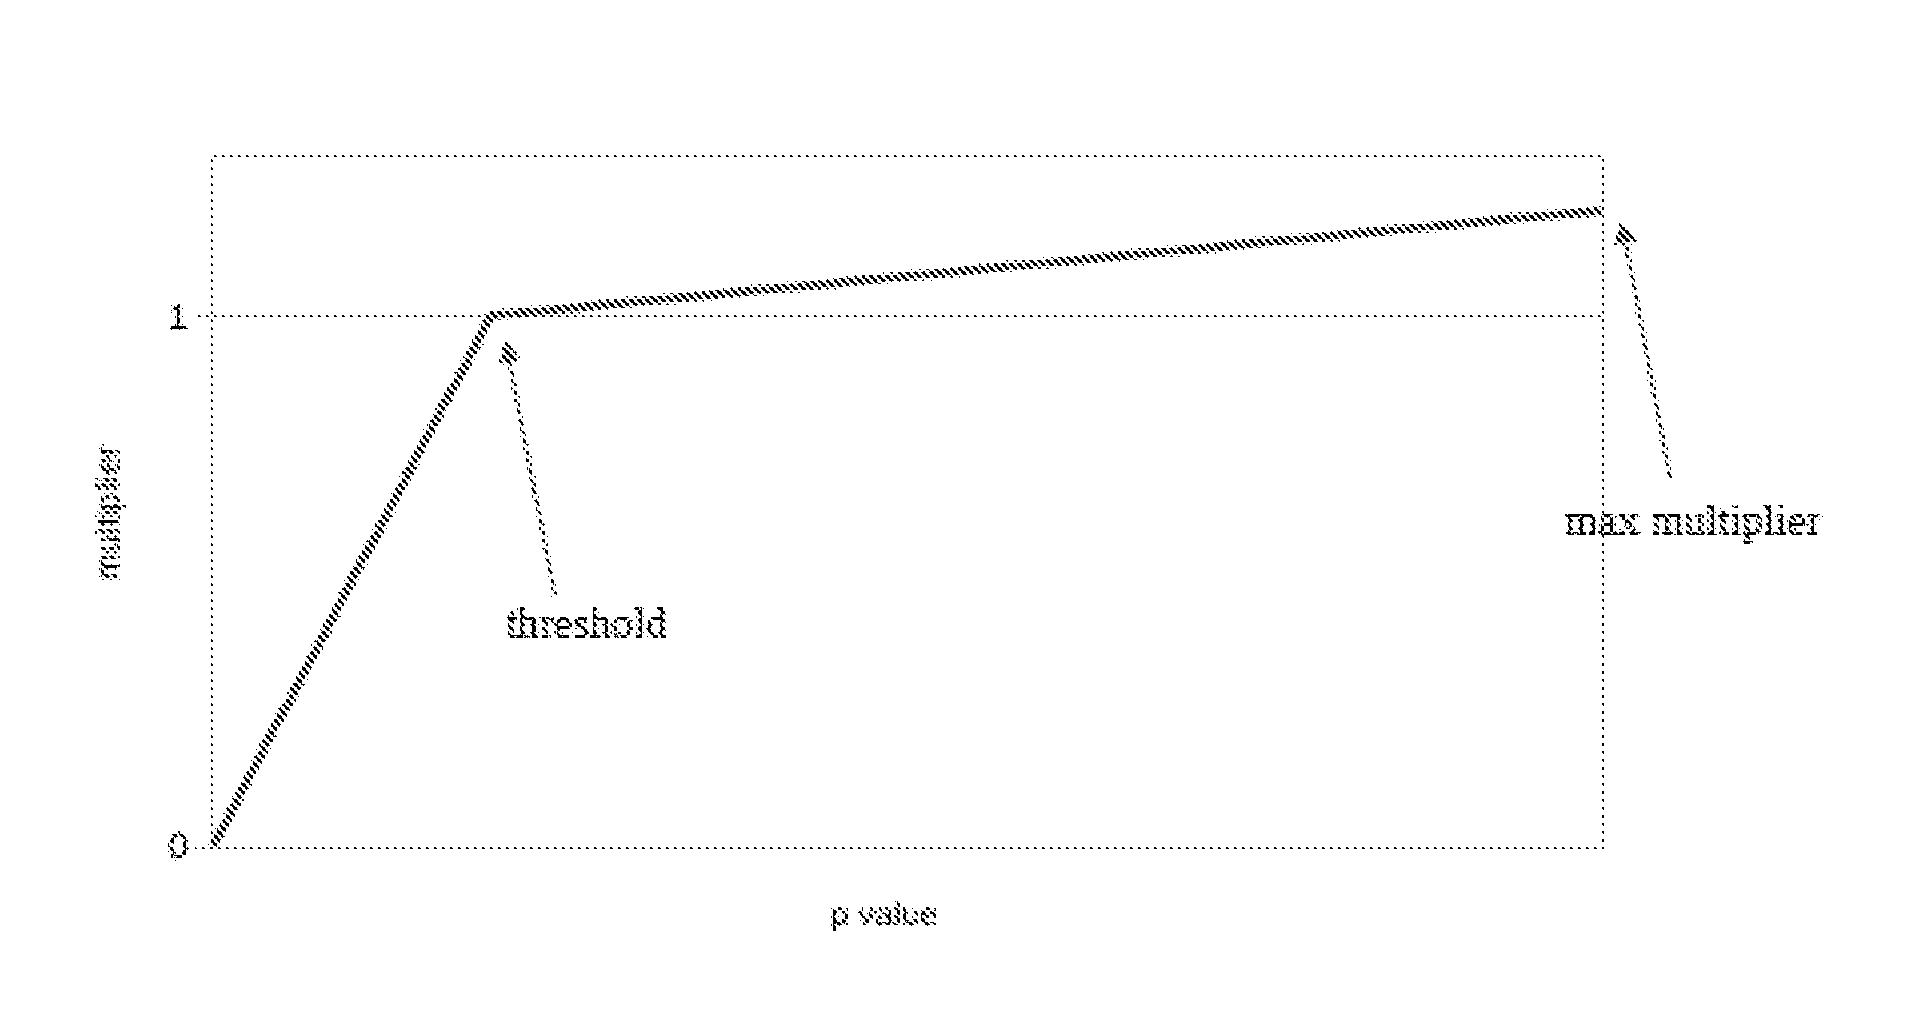 Web anomaly detection apparatus and method